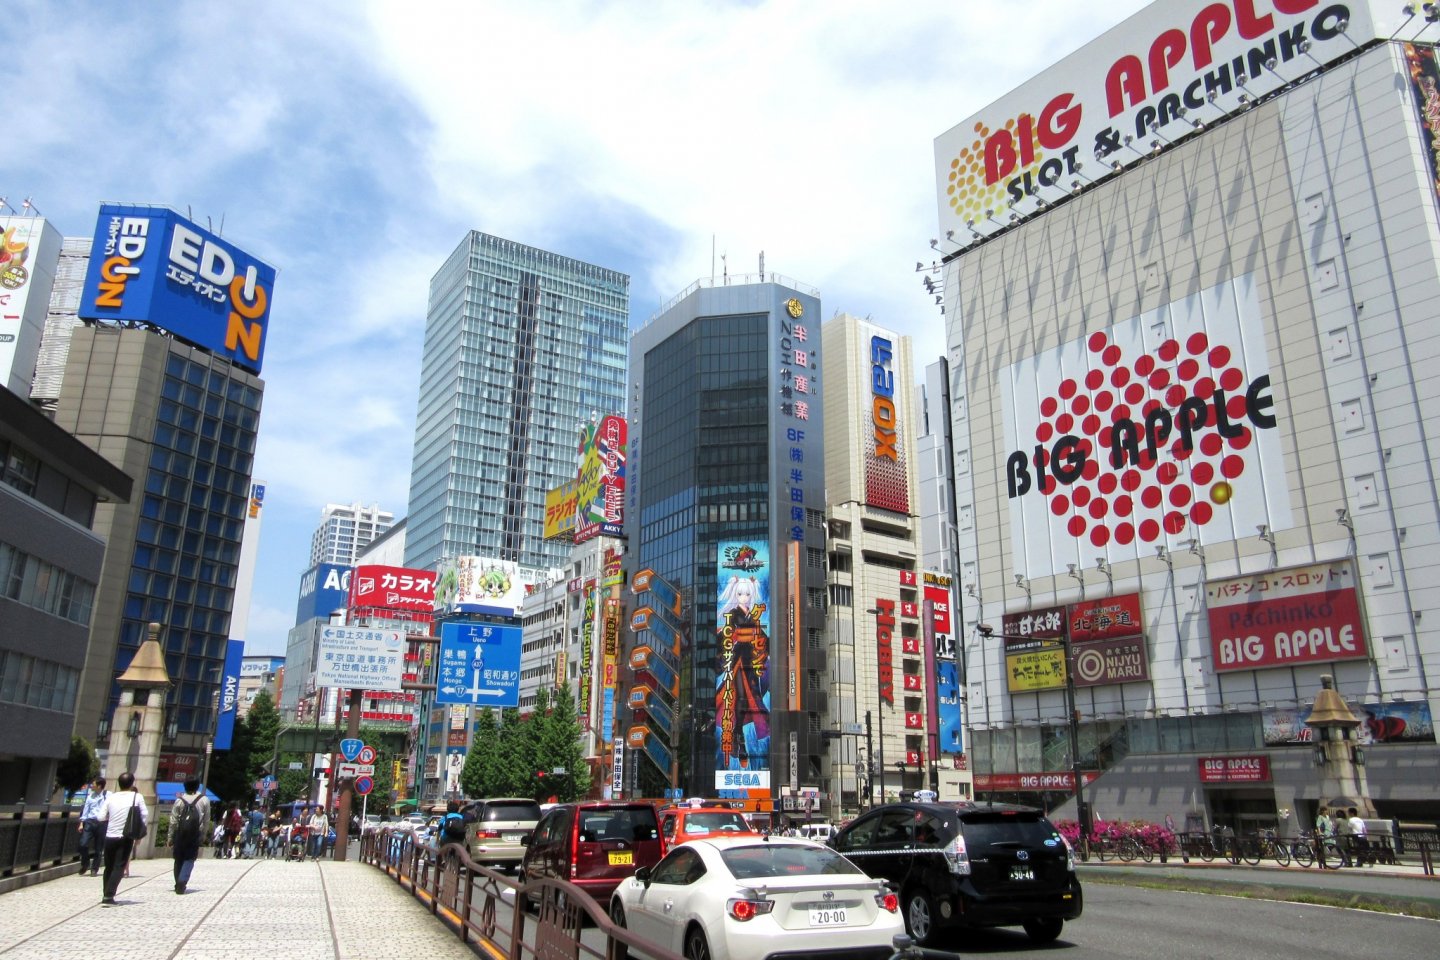 Akiba looks very bright and colorful